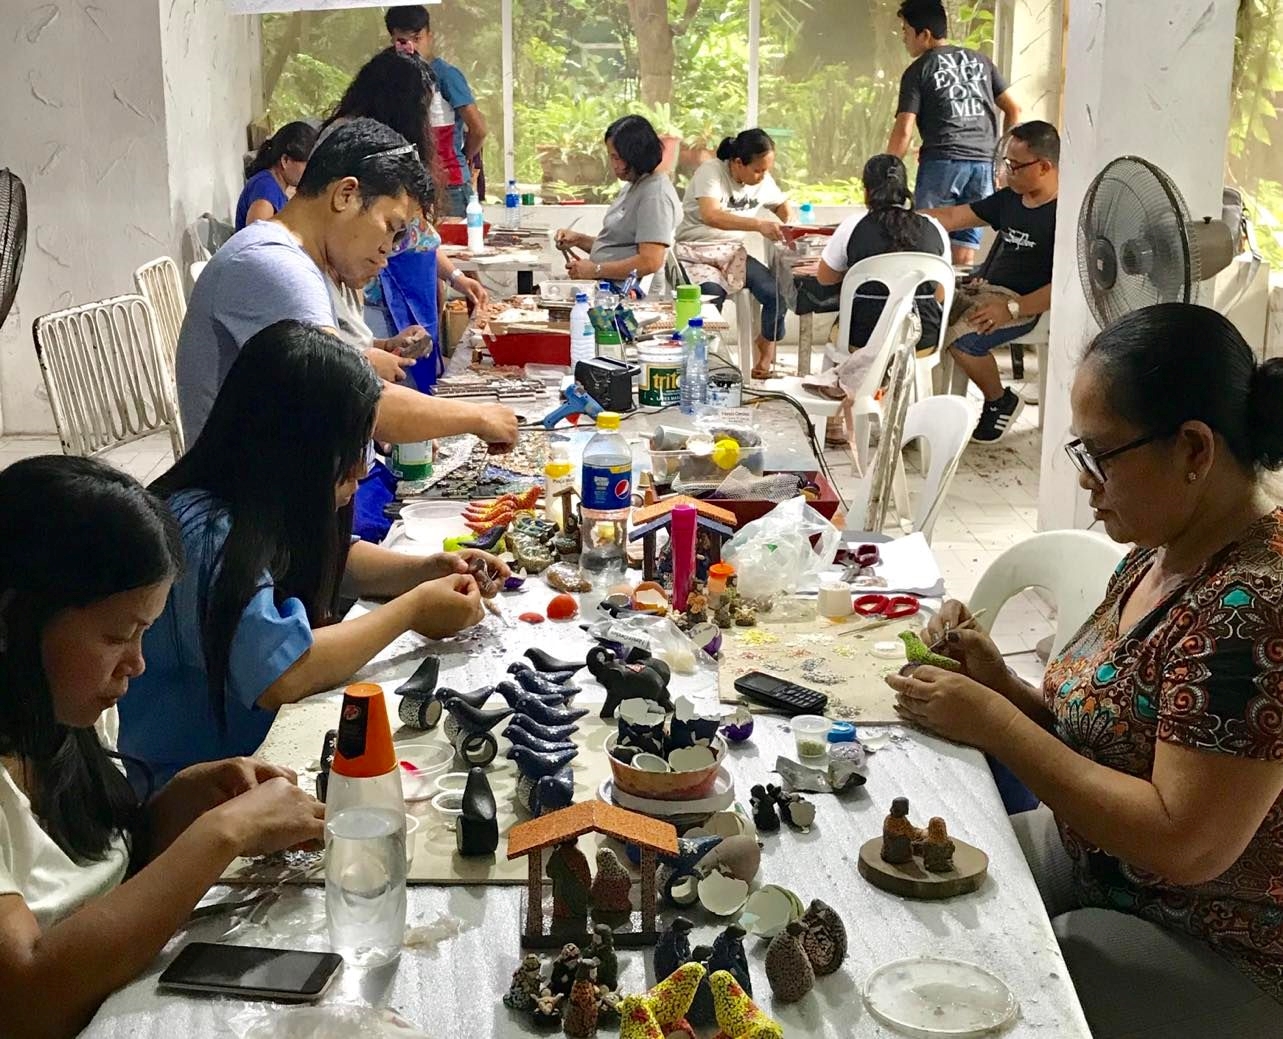 Members of the Negrense Volunteers for Change Foundation make Christmas ornaments that can help feed undernourished children.